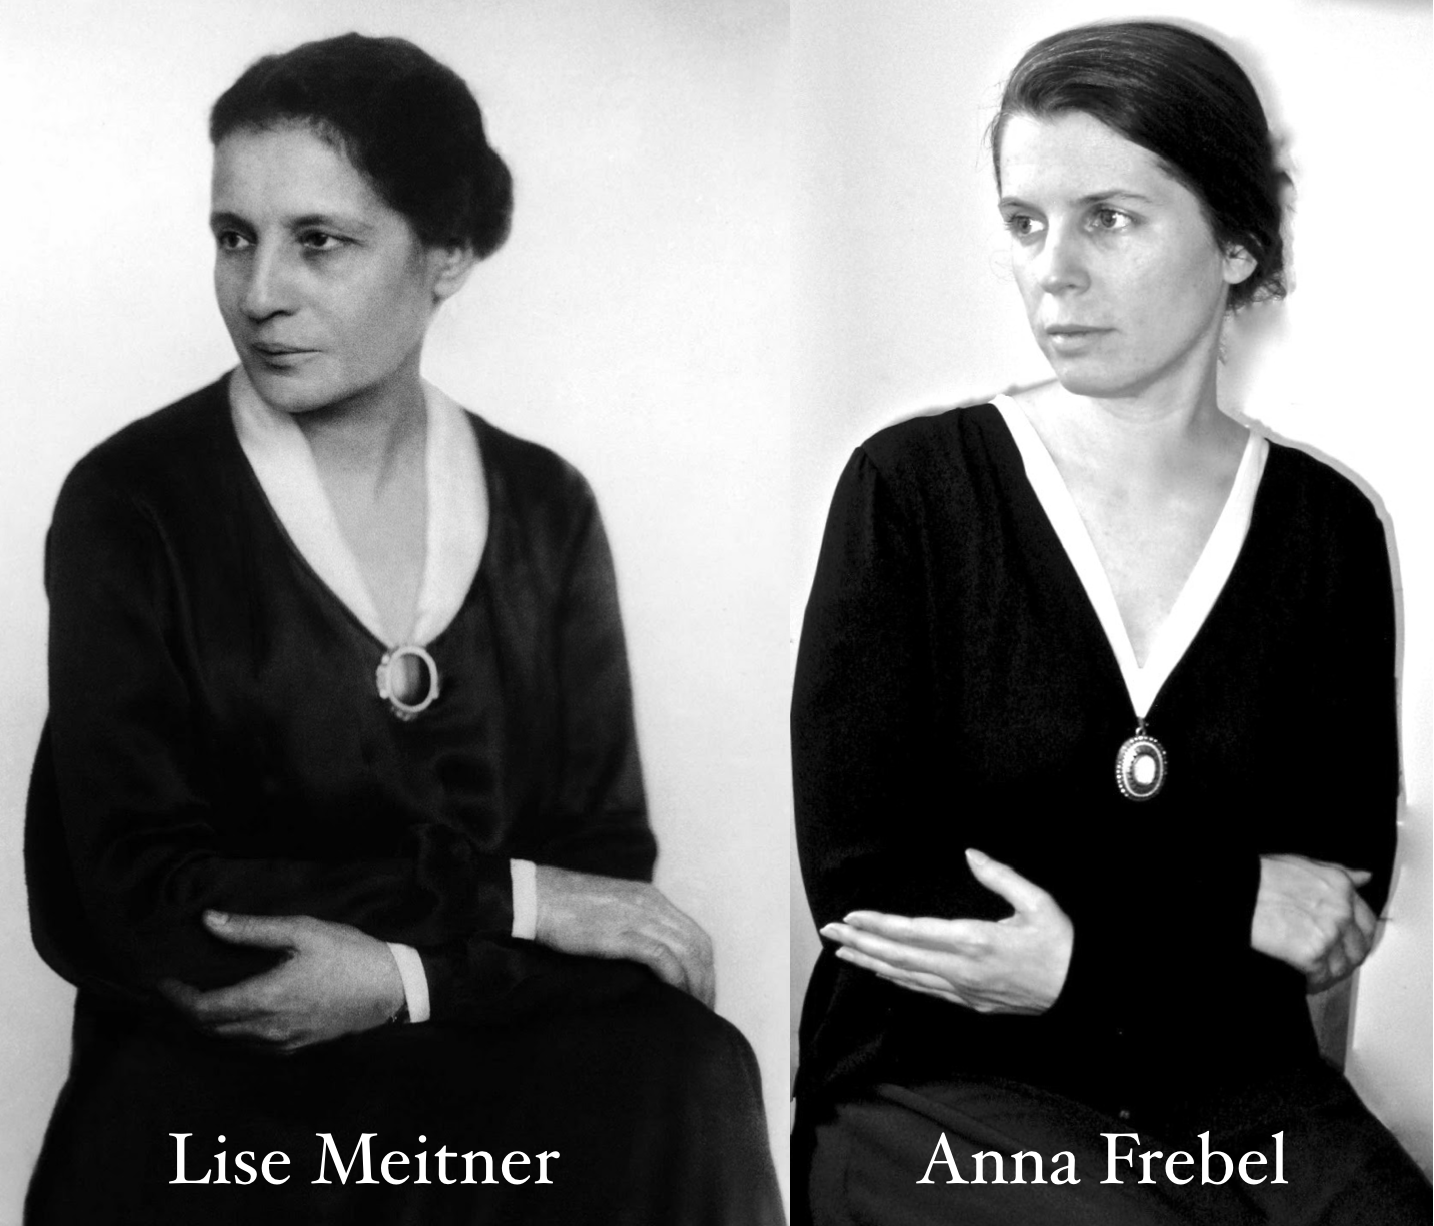 Anna Frebel, professor of physics and head of astrophysics at the MIT Kavil Institute for Astrophysics and Space Research, transforms into nuclear physicist Lise Meitner.